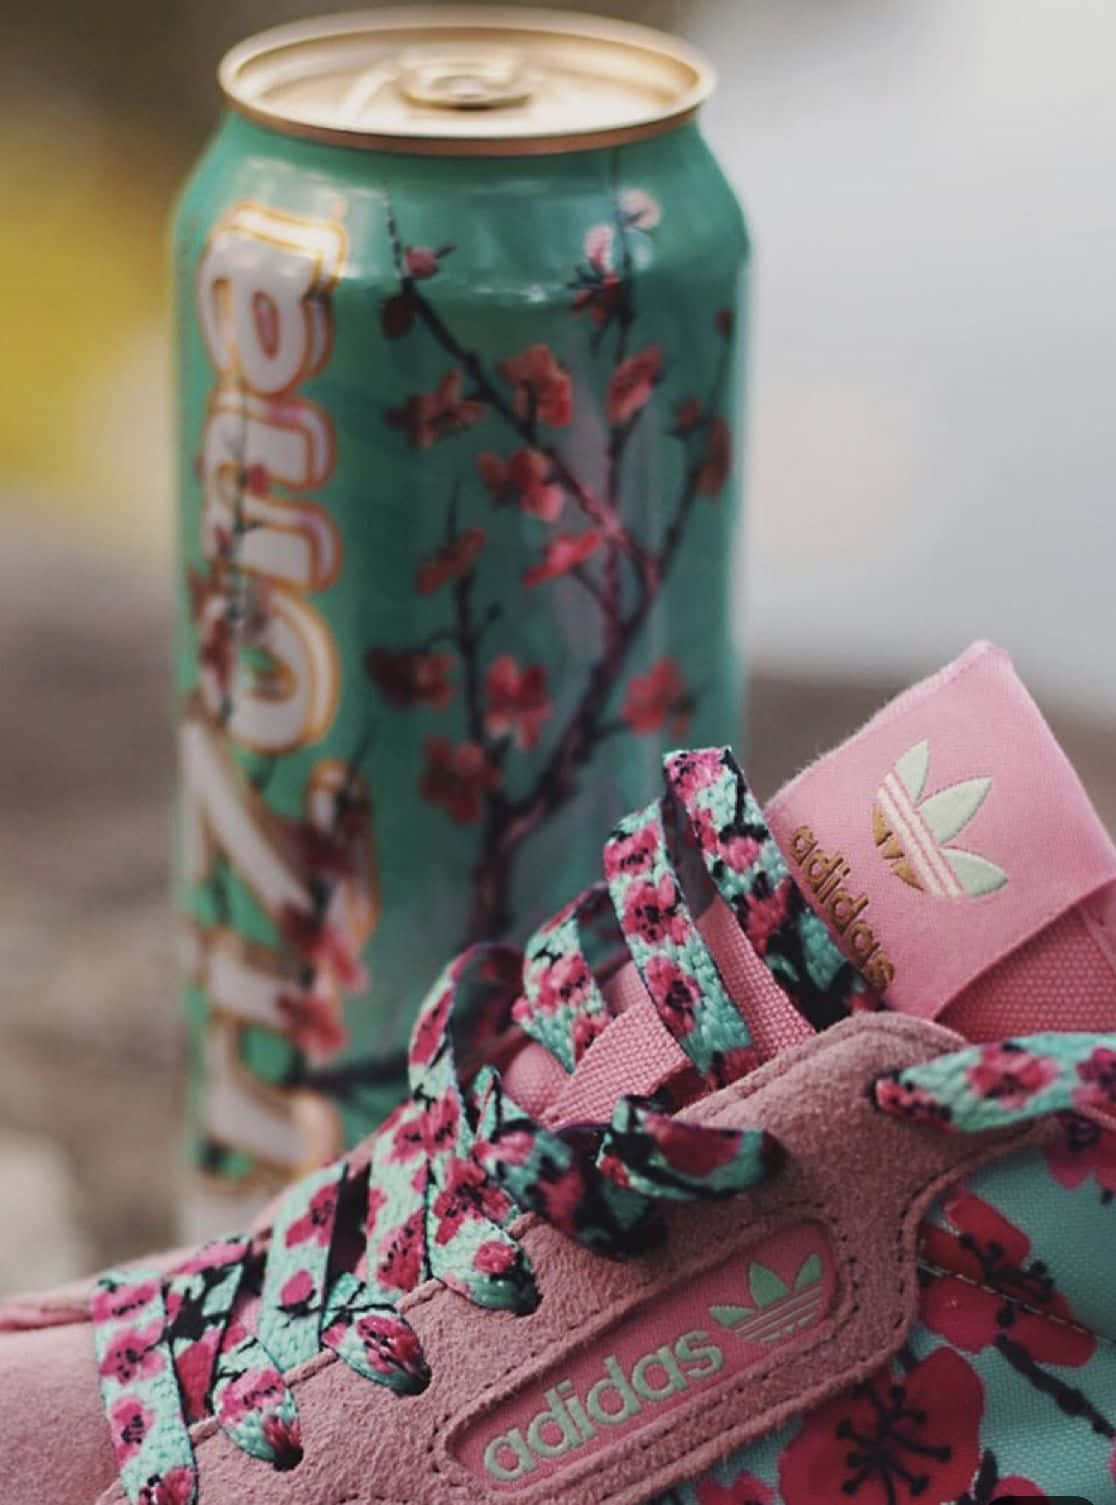 A Pink And White Adidas Sneaker With A Can Of Soda Wallpaper